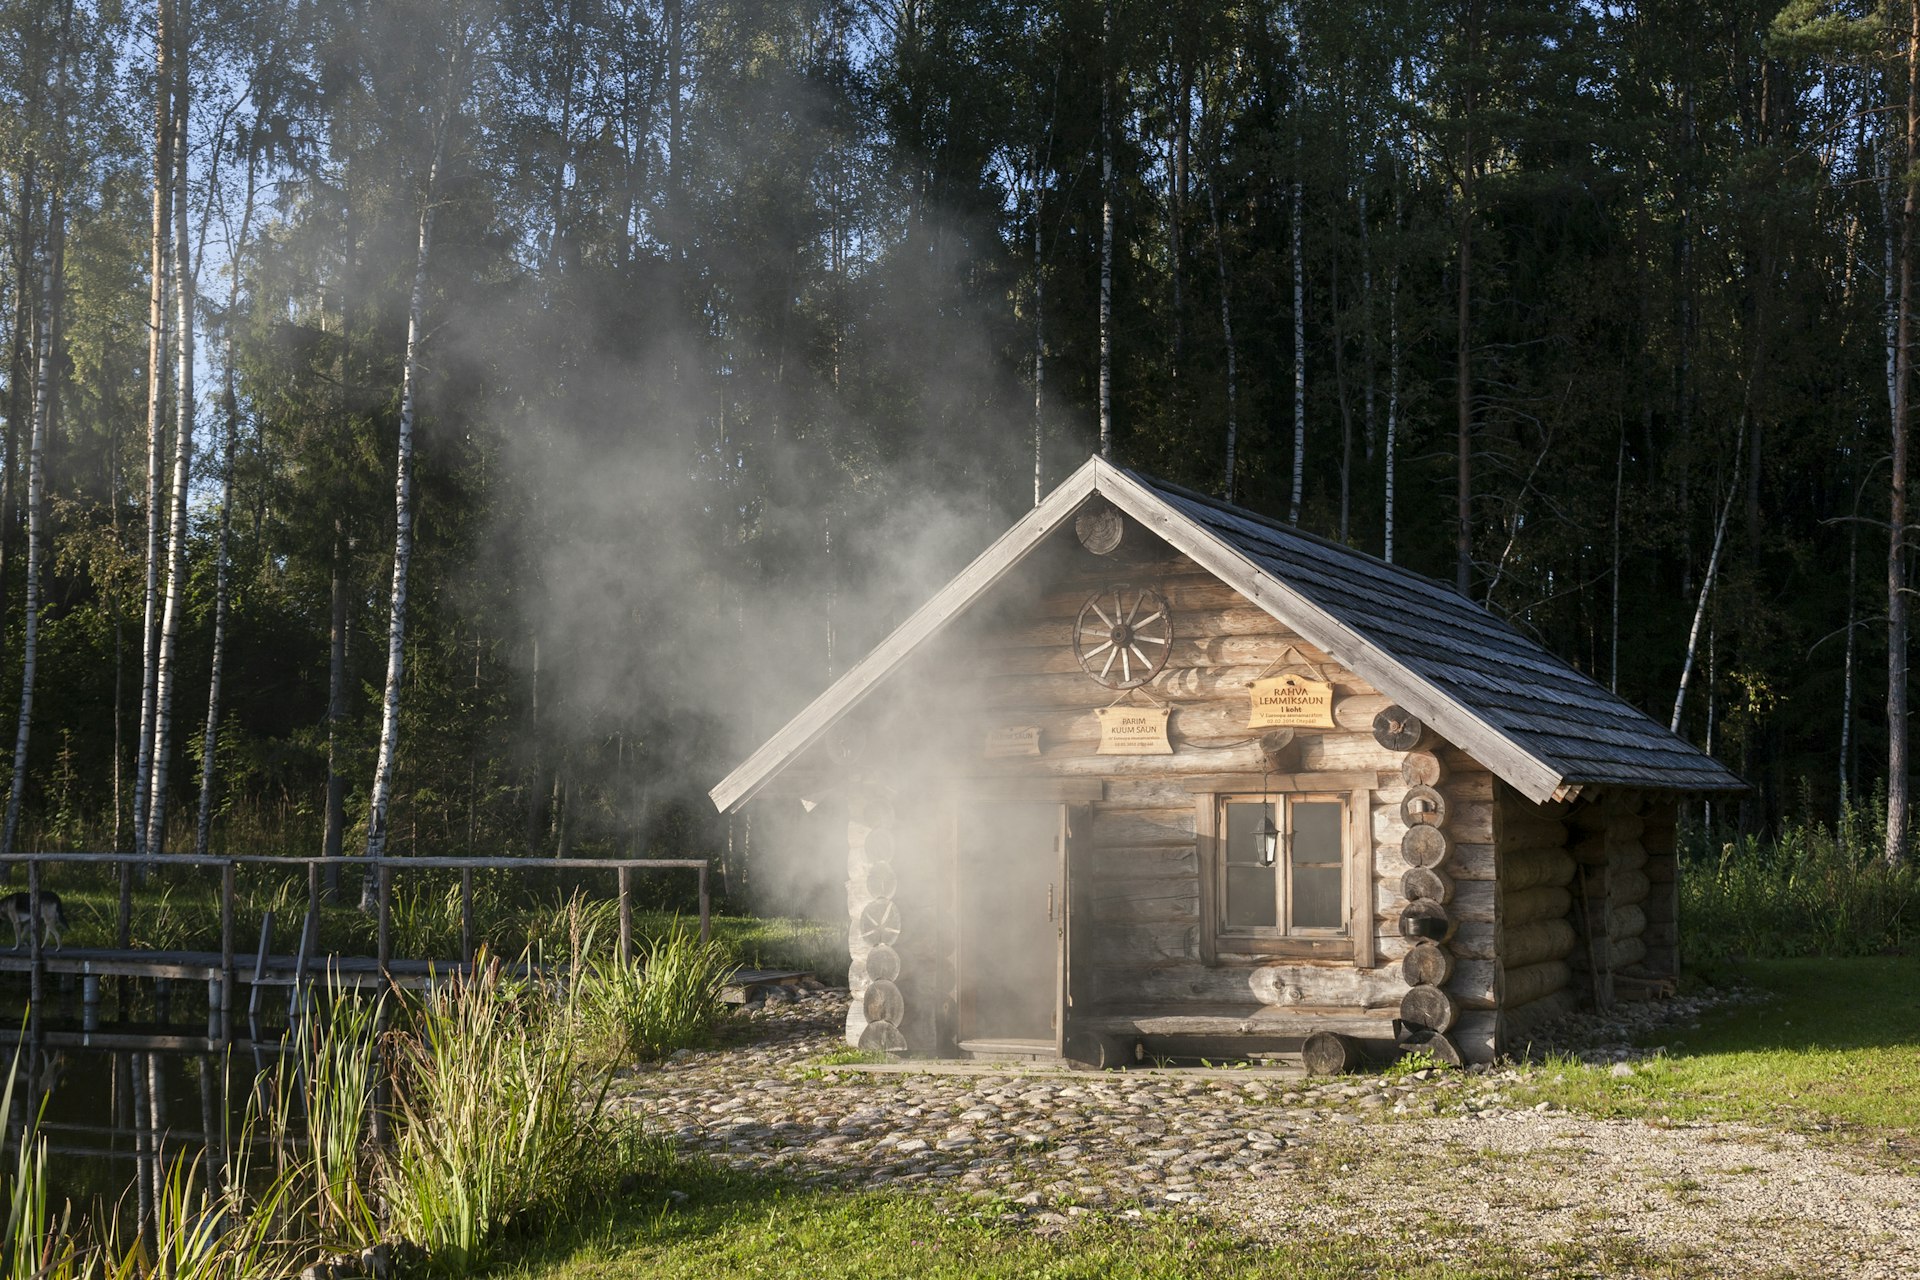 A small wooden cabin with smoke and steam coming out the open door